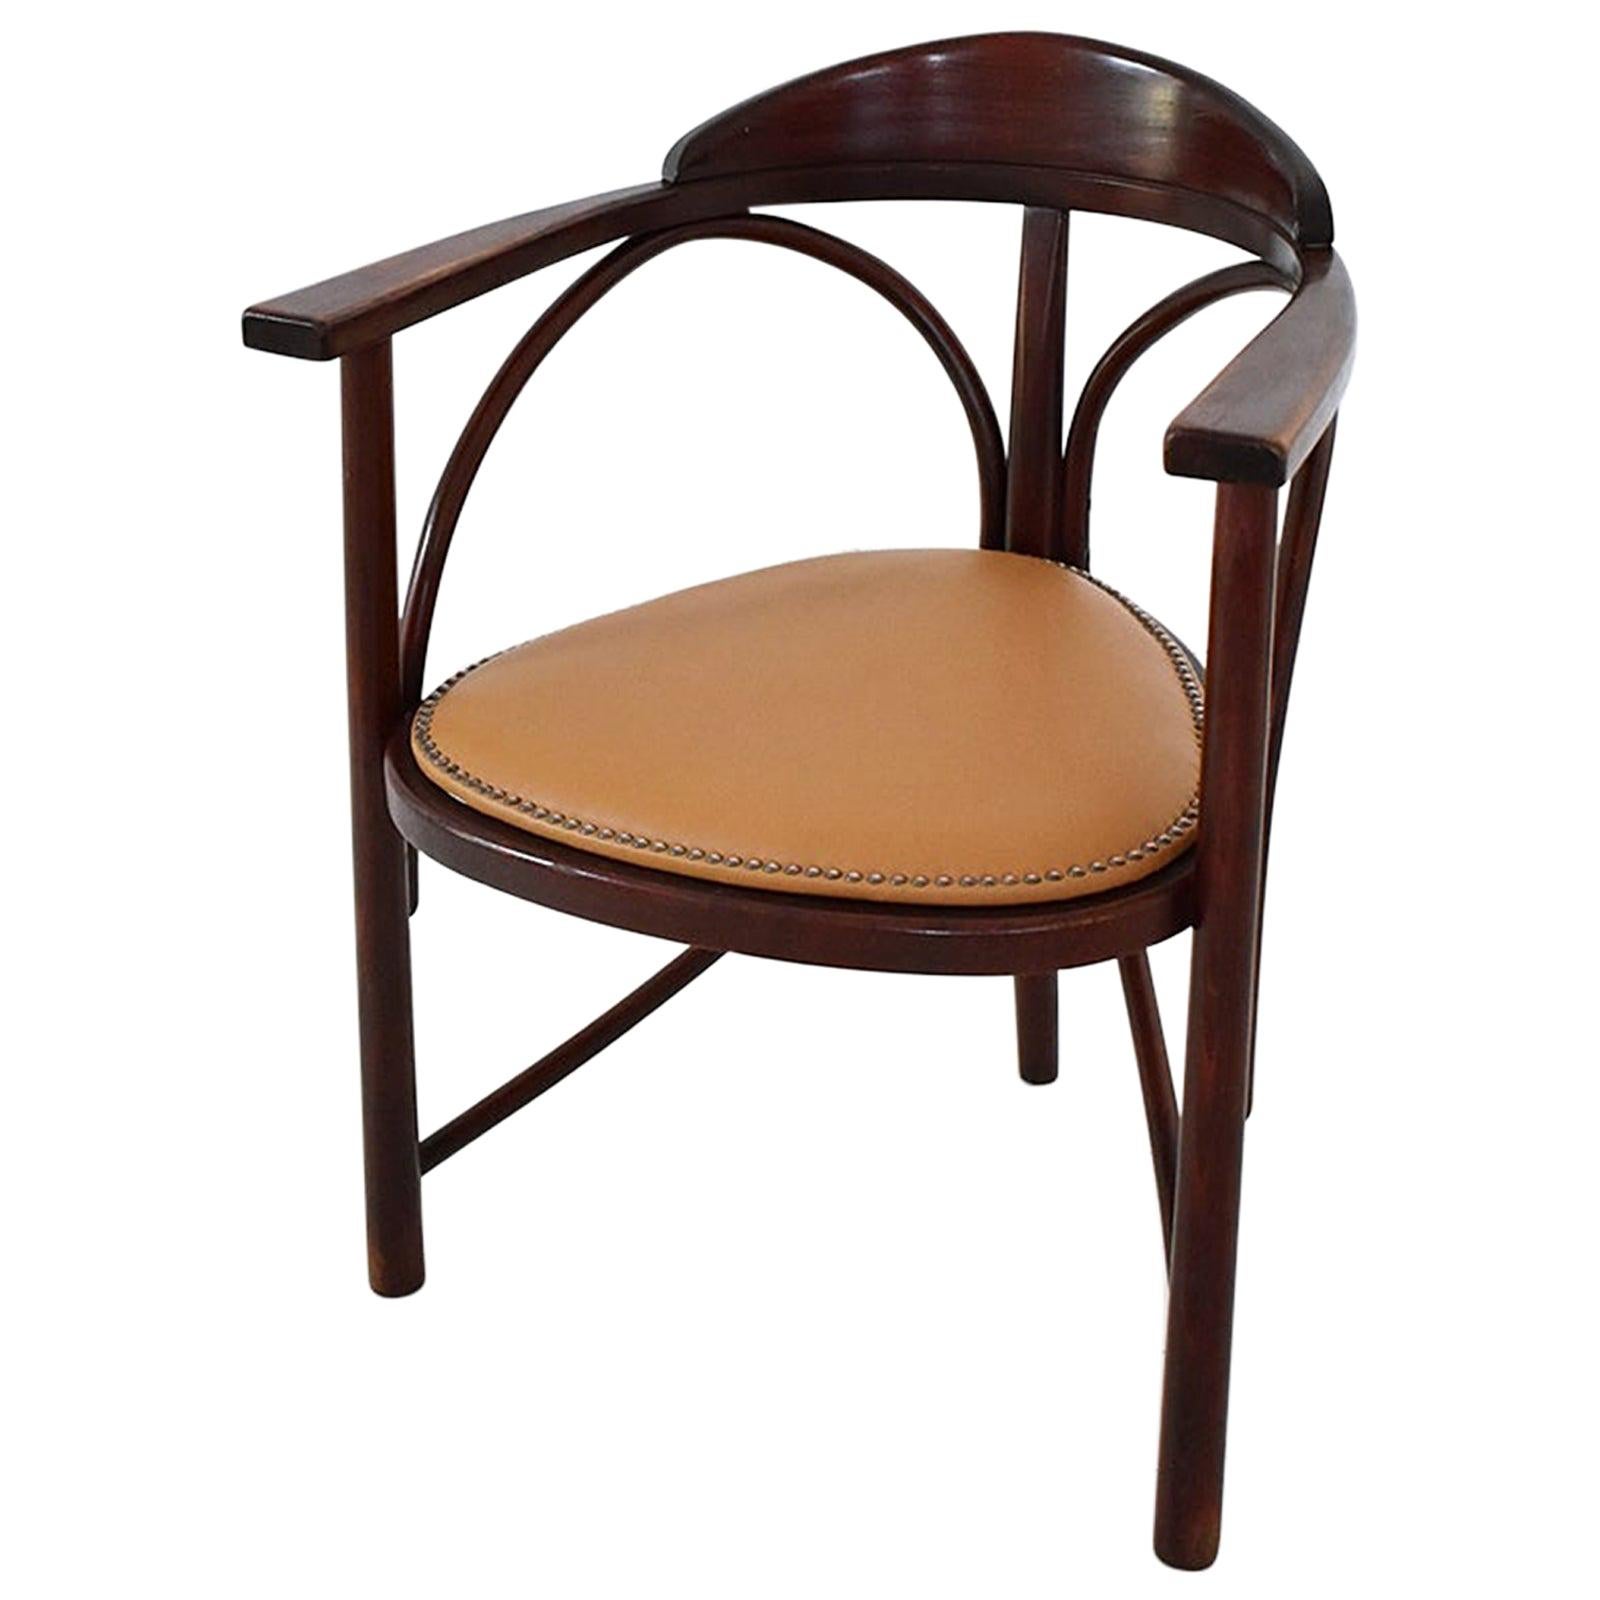 This stunning vintage Hajduthonet Rondo armchair was originally called the No 81 chair. It was designed between 1900 and 1904 by an unknown Austrian architect. For the time it was an Avant Garde design. The minimal frame is a perfect solution for